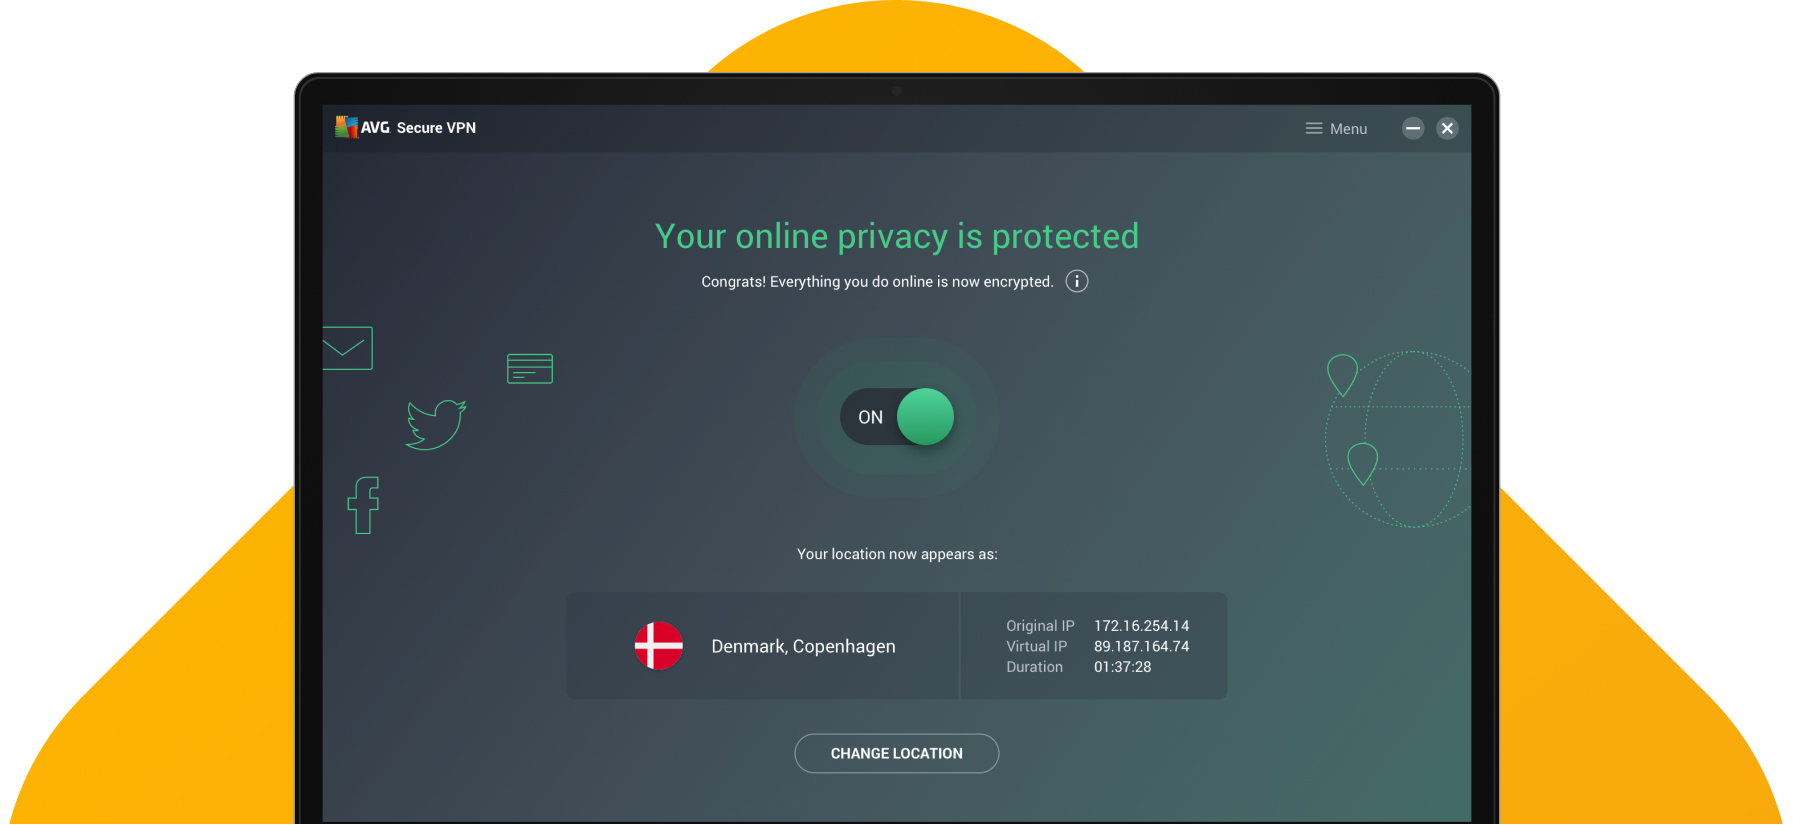 Perfect Privacy VPN 1.10 - Download for PC Free